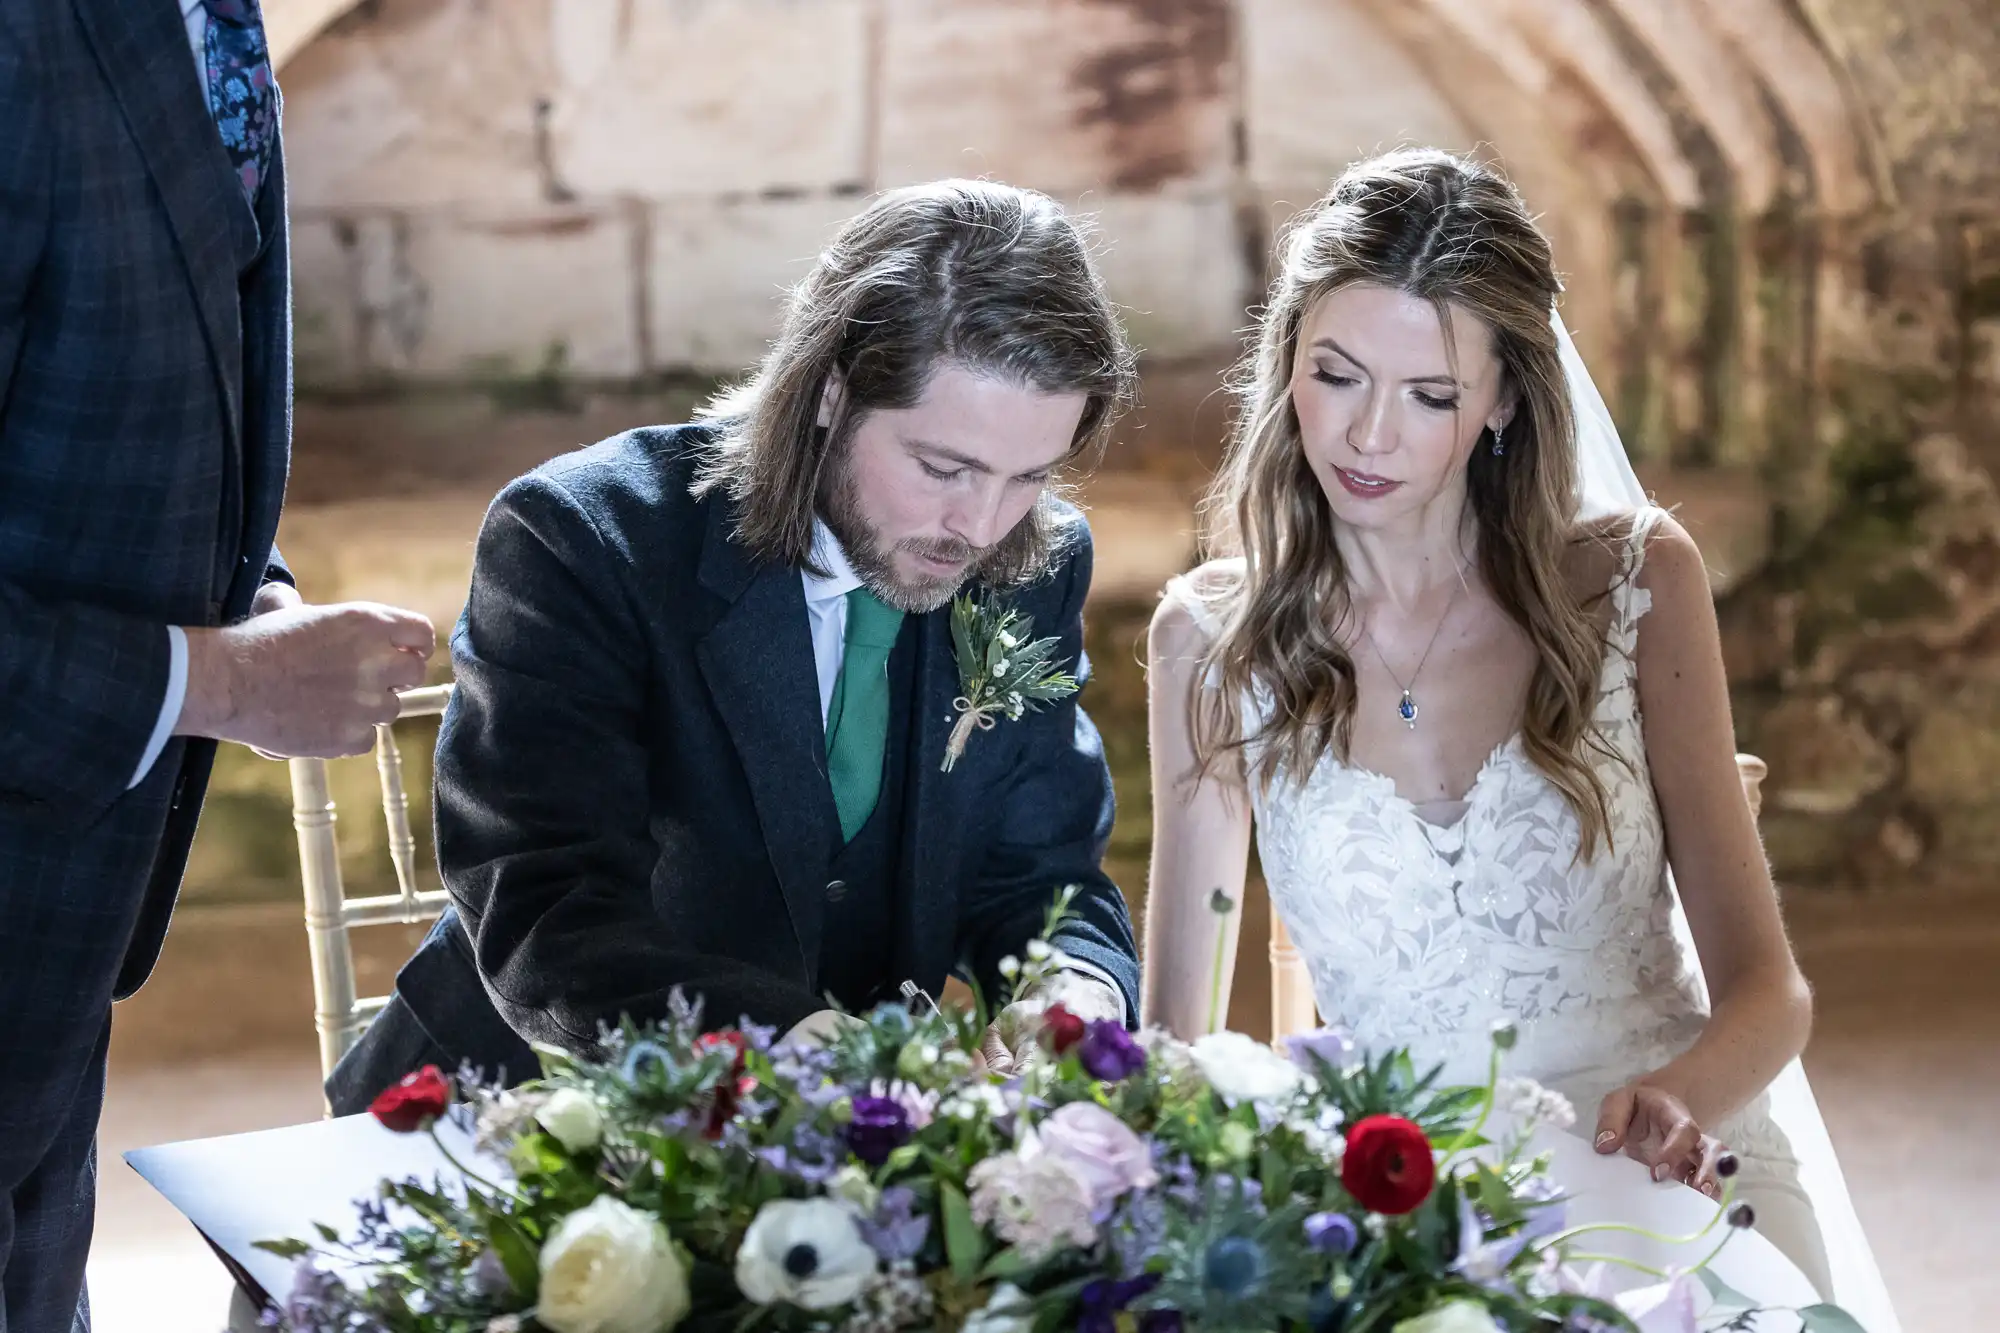 A couple is seated at a table, signing documents at their wedding. The groom wears a suit with a green tie and boutonniere, while the bride wears a white dress with lace details. A floral arrangement is on the table.